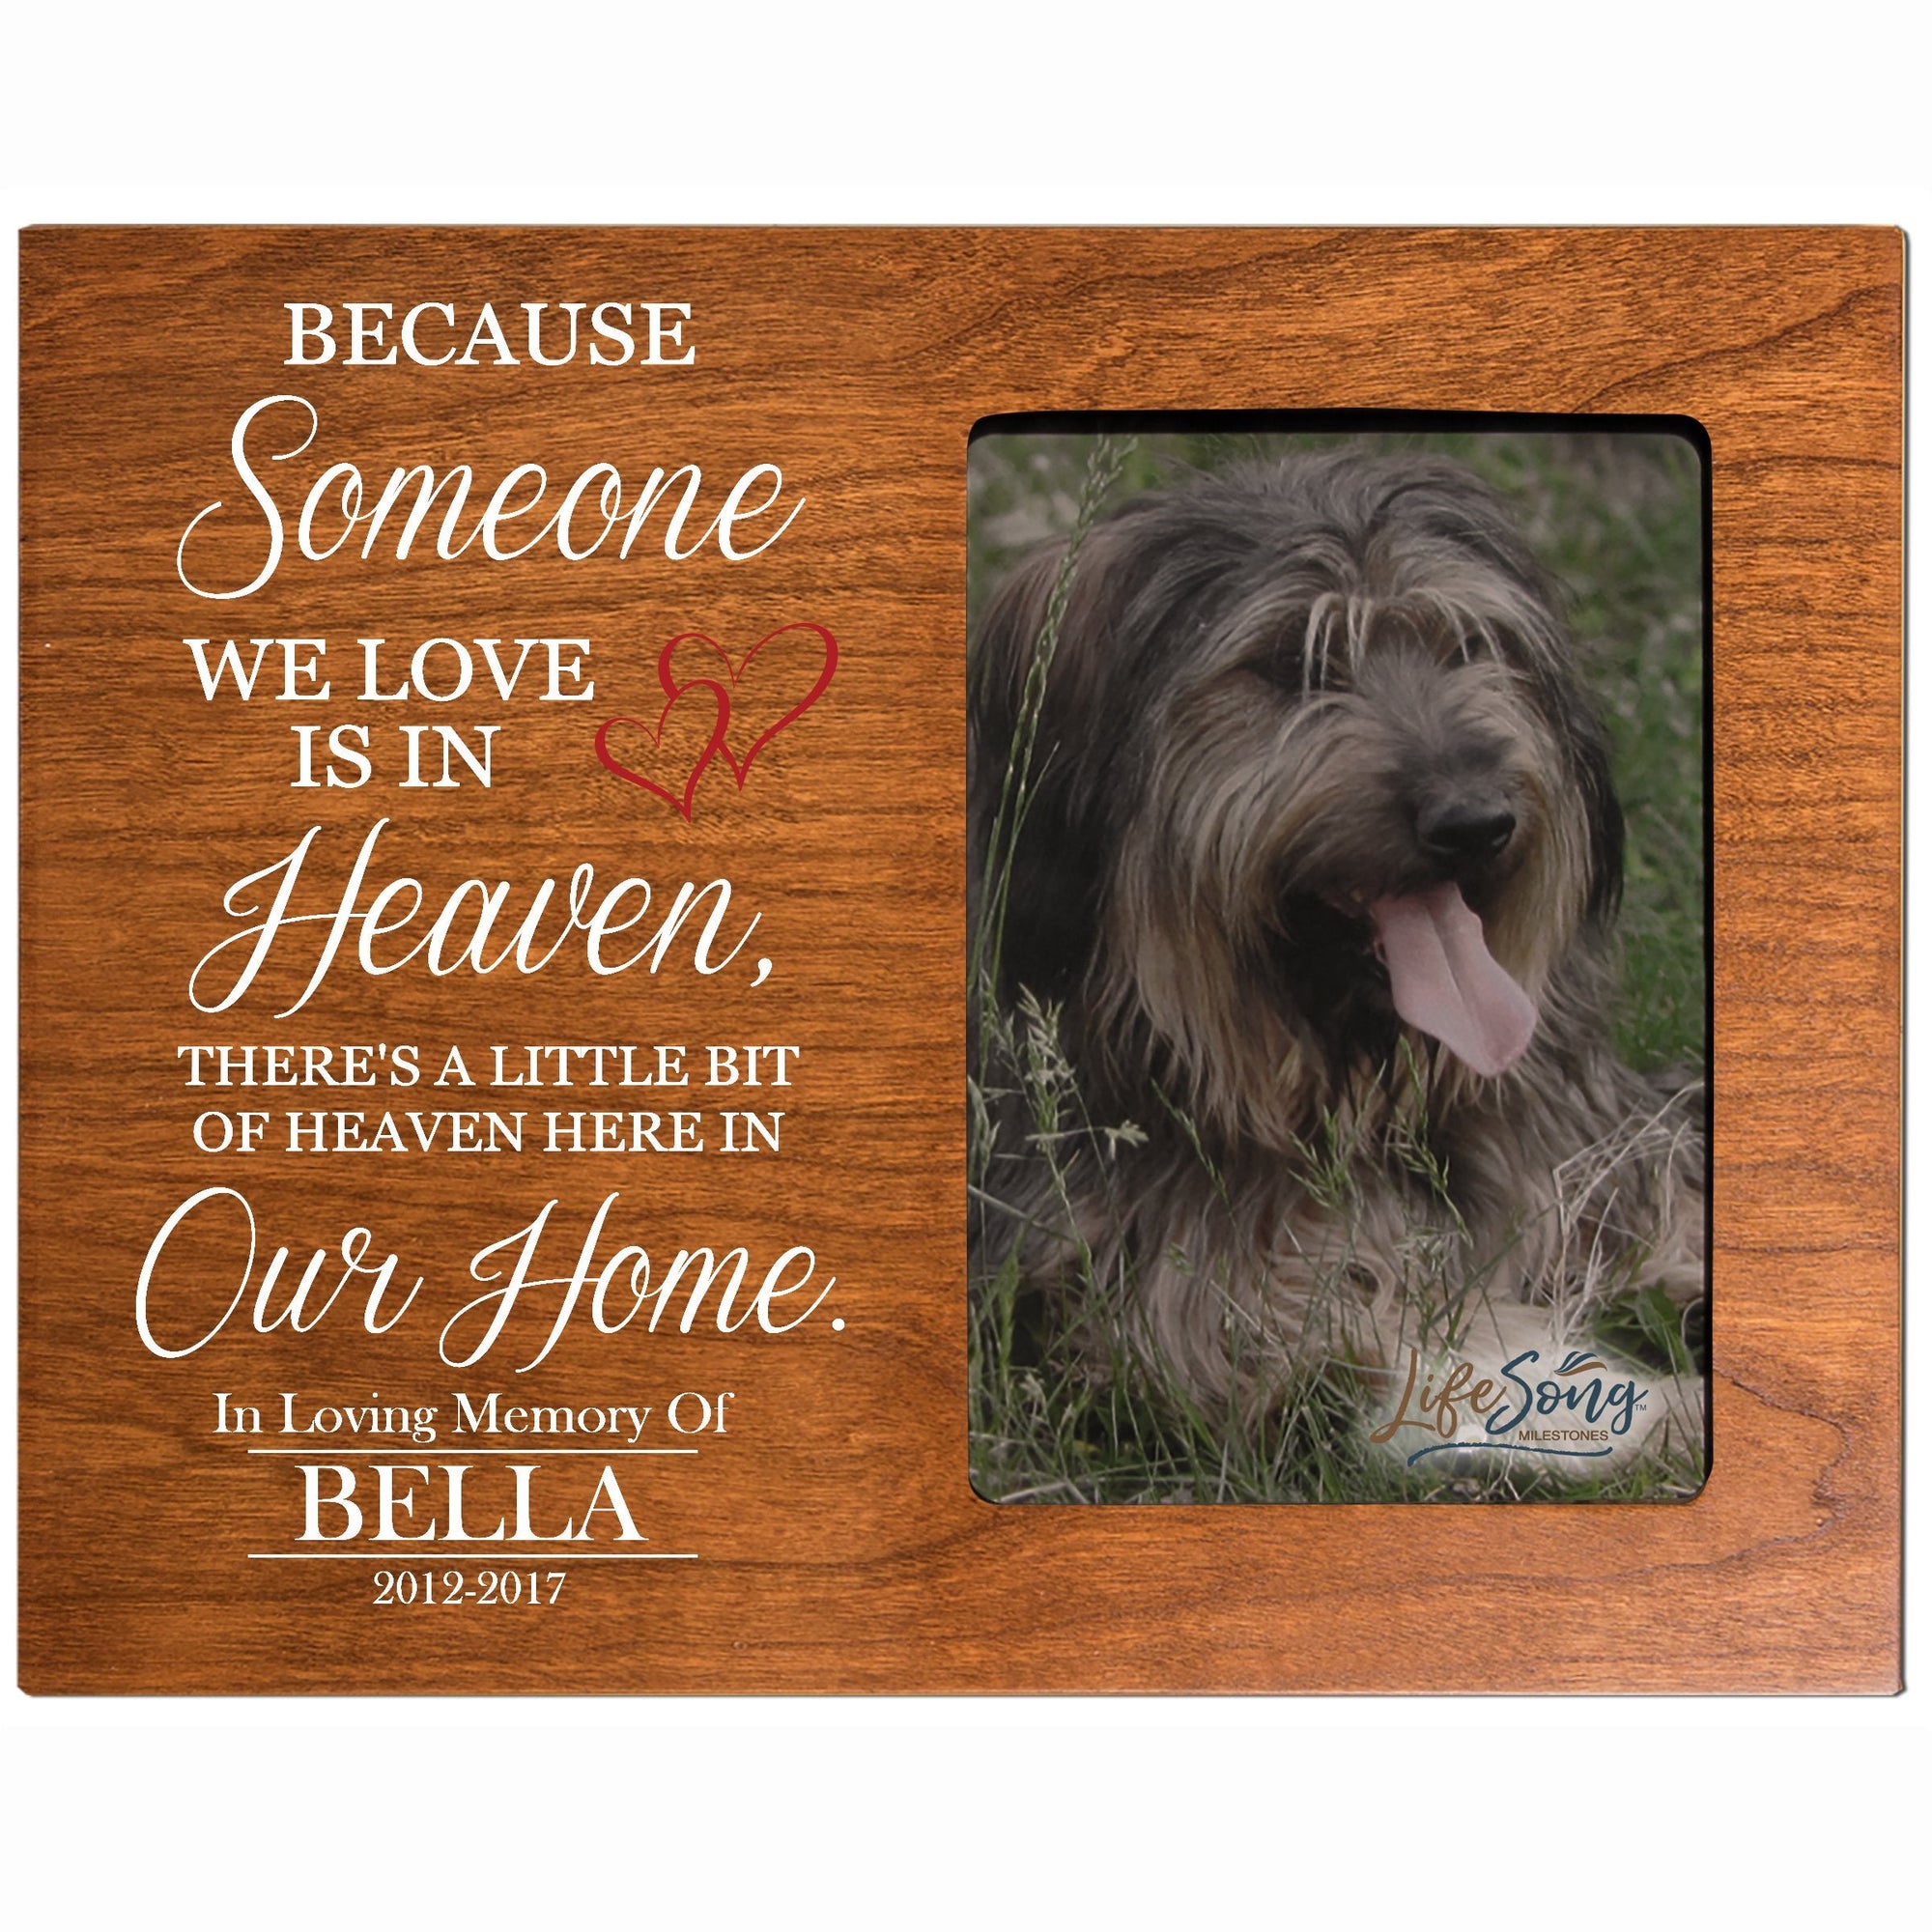 8x10 Cherry Pet Memorial Picture Frame with the phrase "Because Someone We Love Is In Heaven"